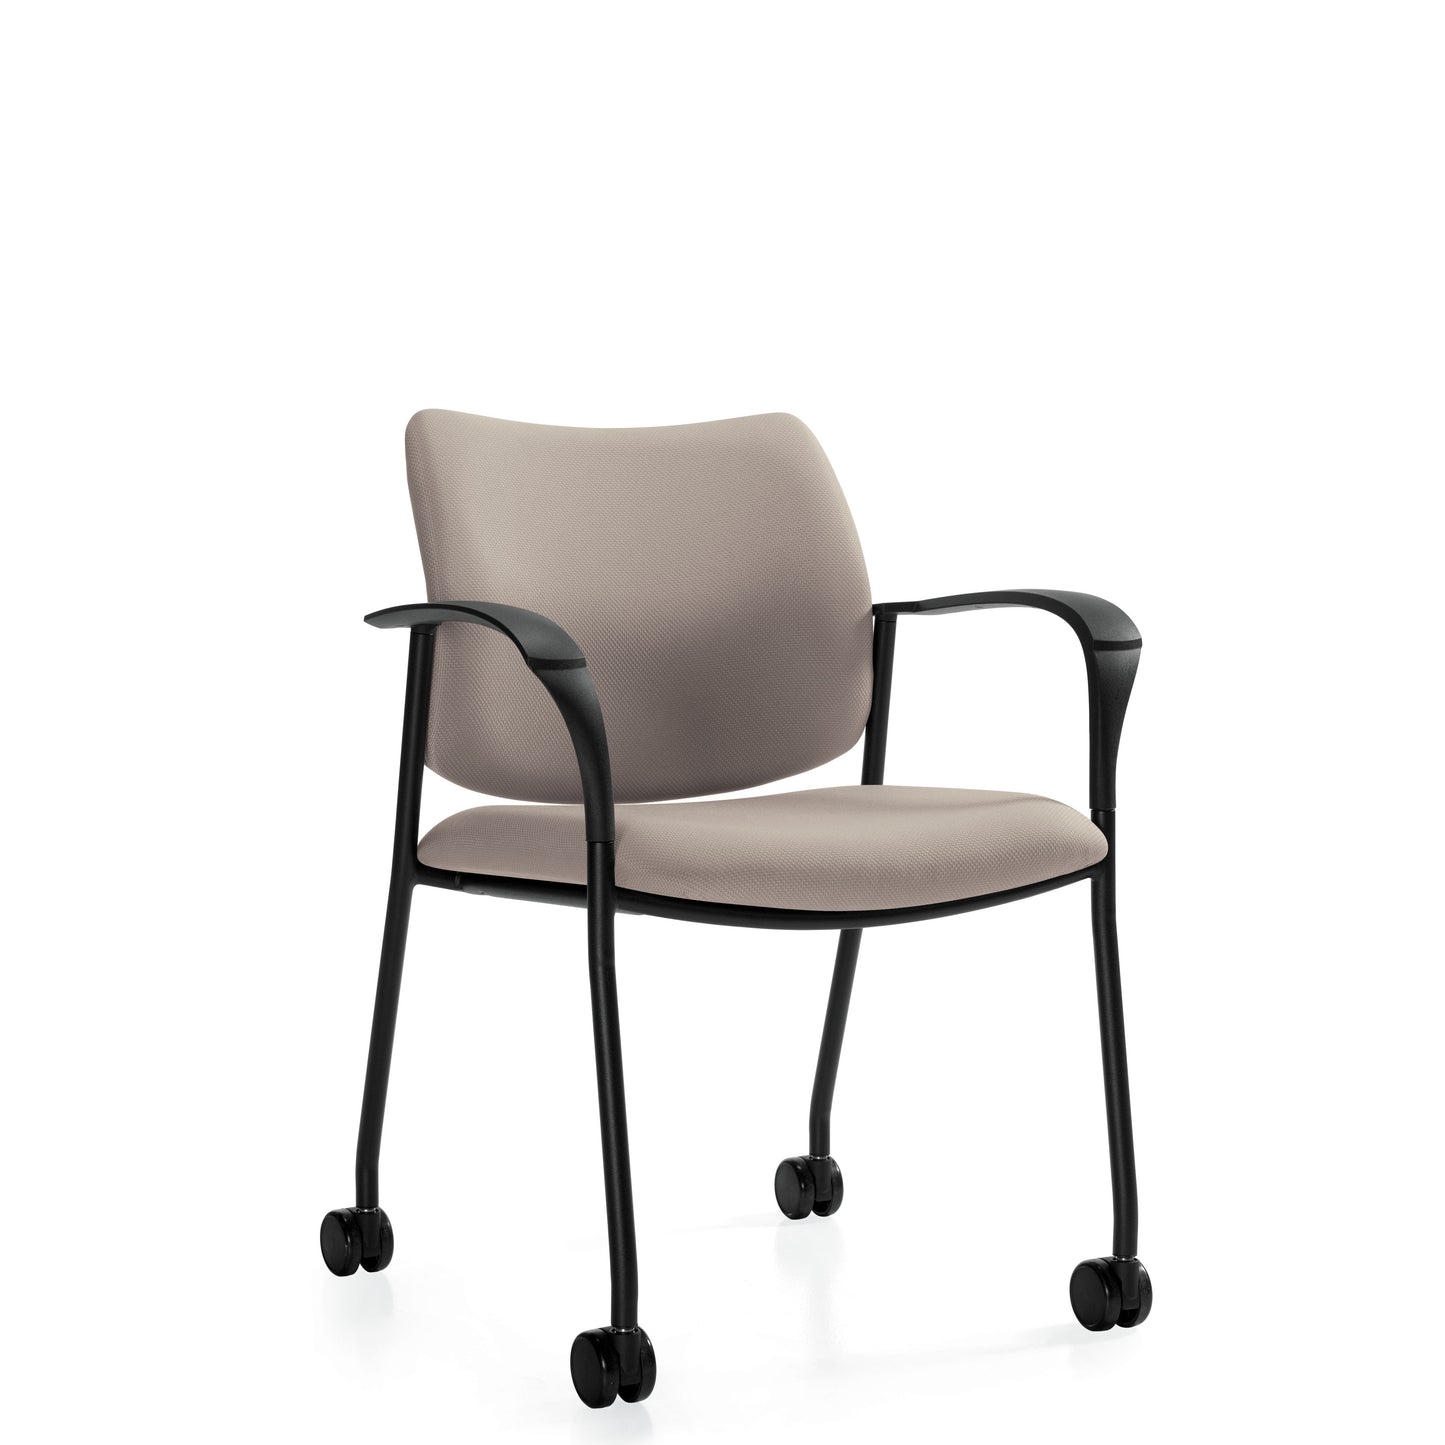 Global Sidero Armchair with Casters 6900C